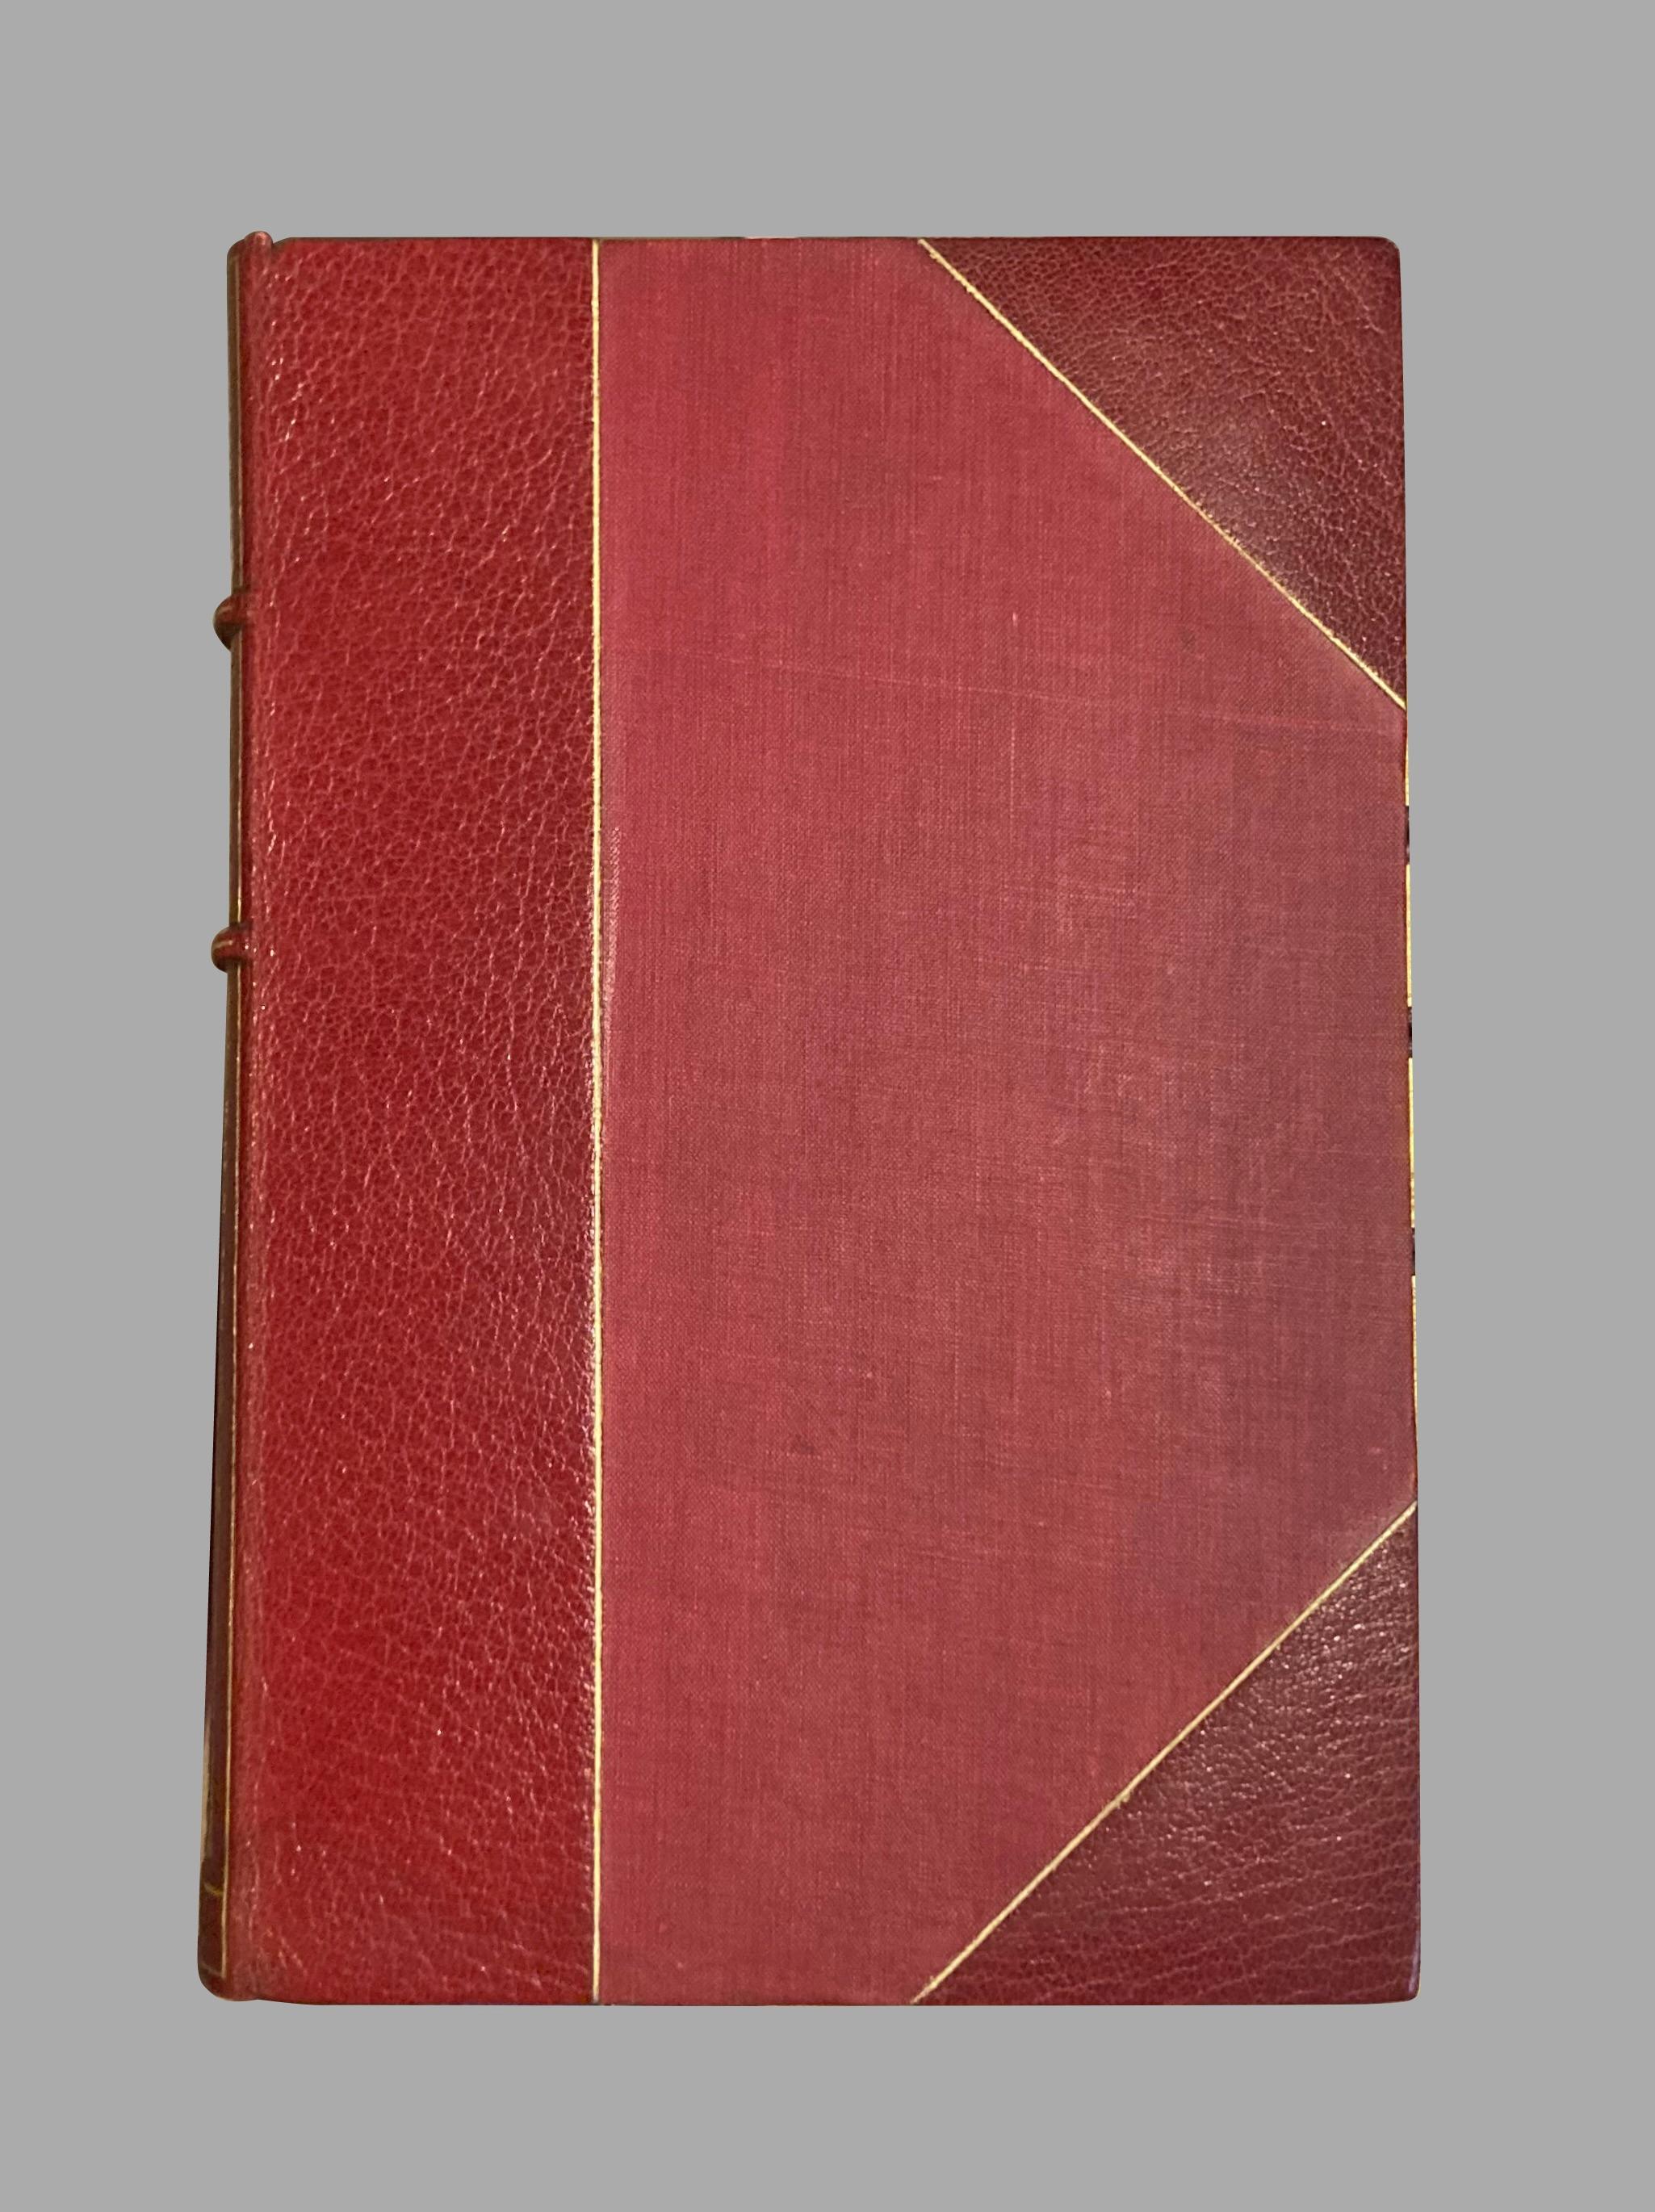 20th Century Complete Writings of O. Henry 14 Red Leather Bound Volumes Limited Edition